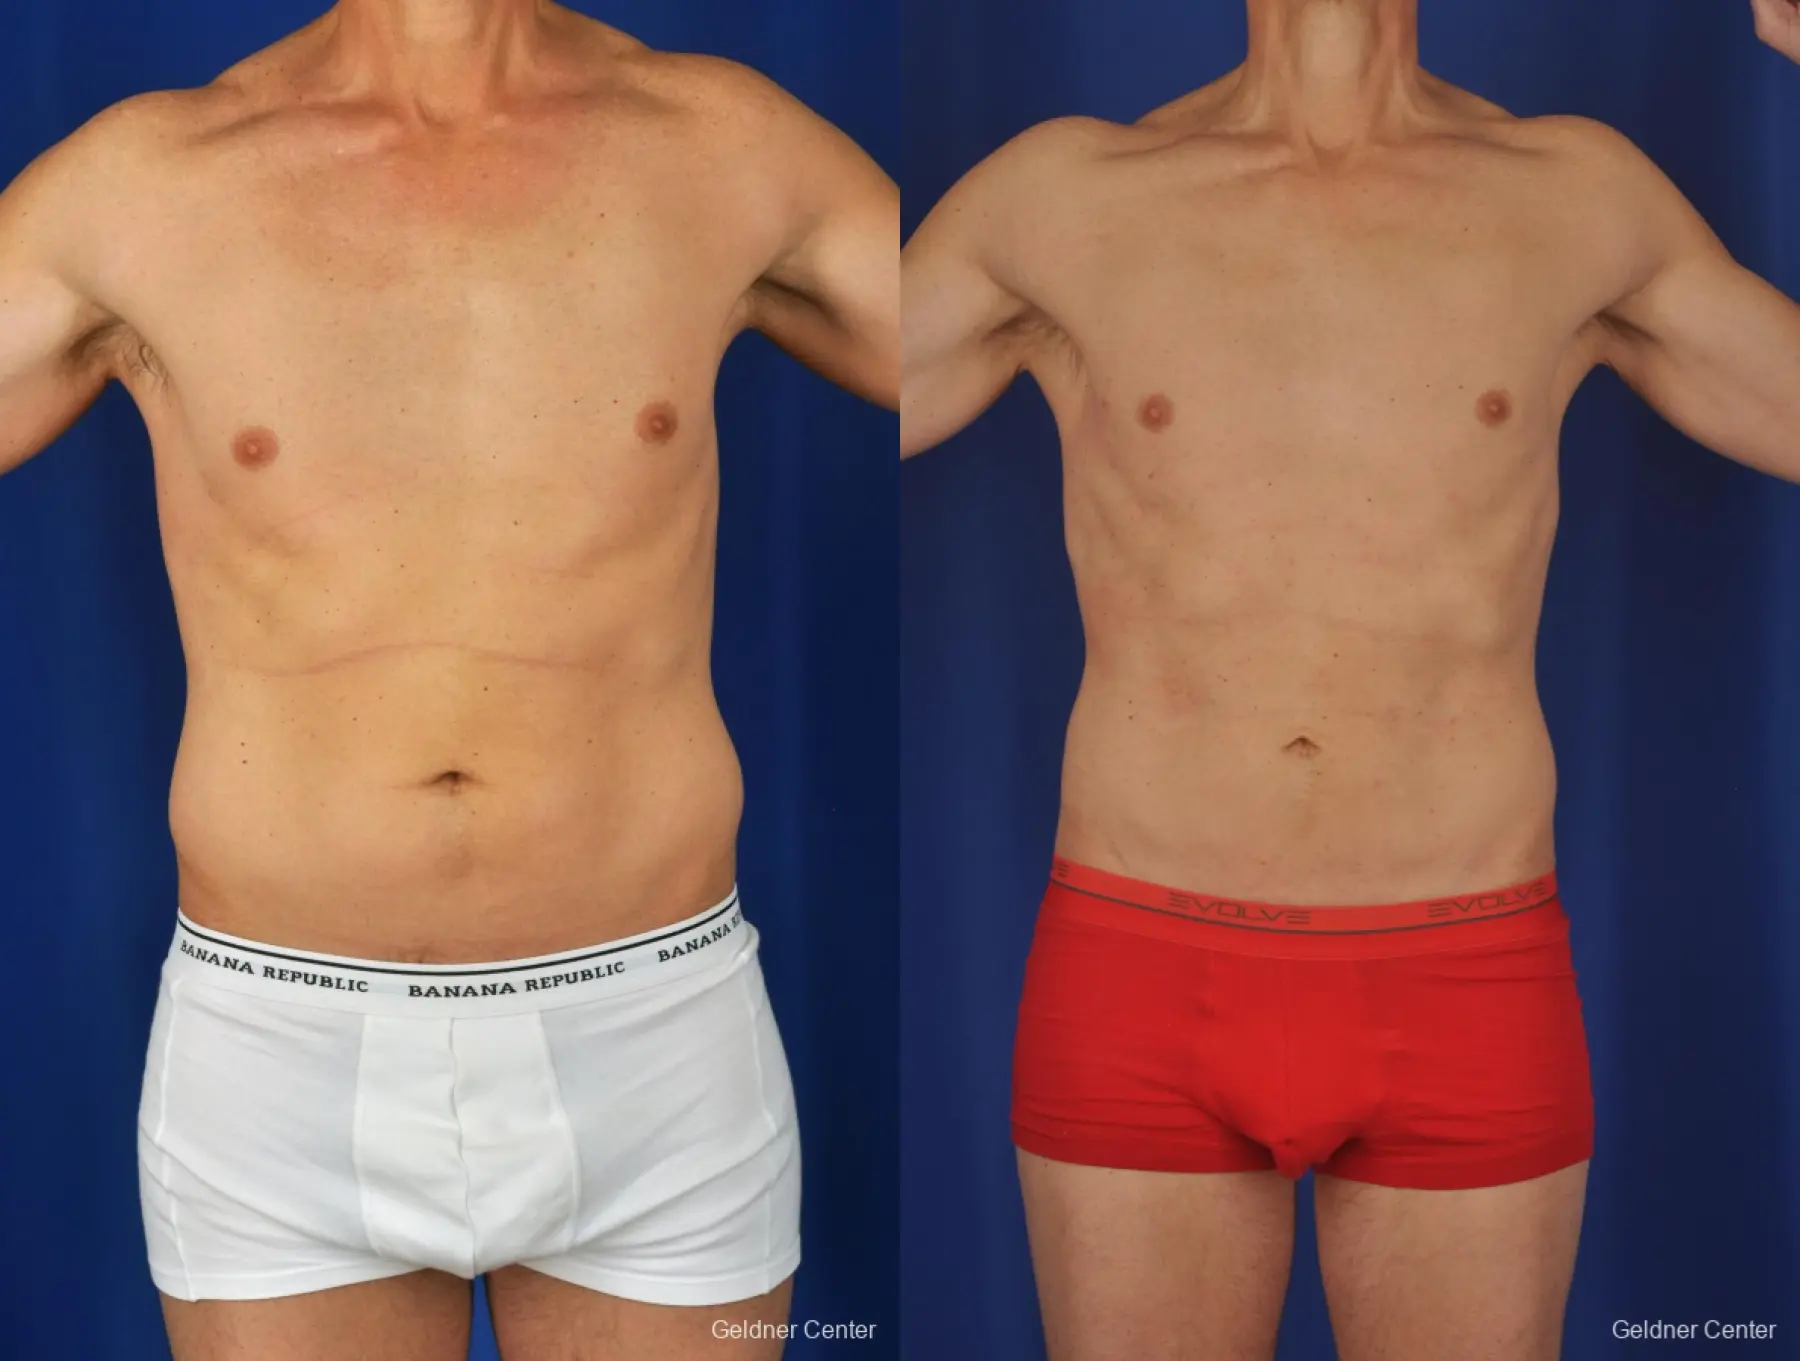 Liposuction-for-men: Patient 2 - Before and After  